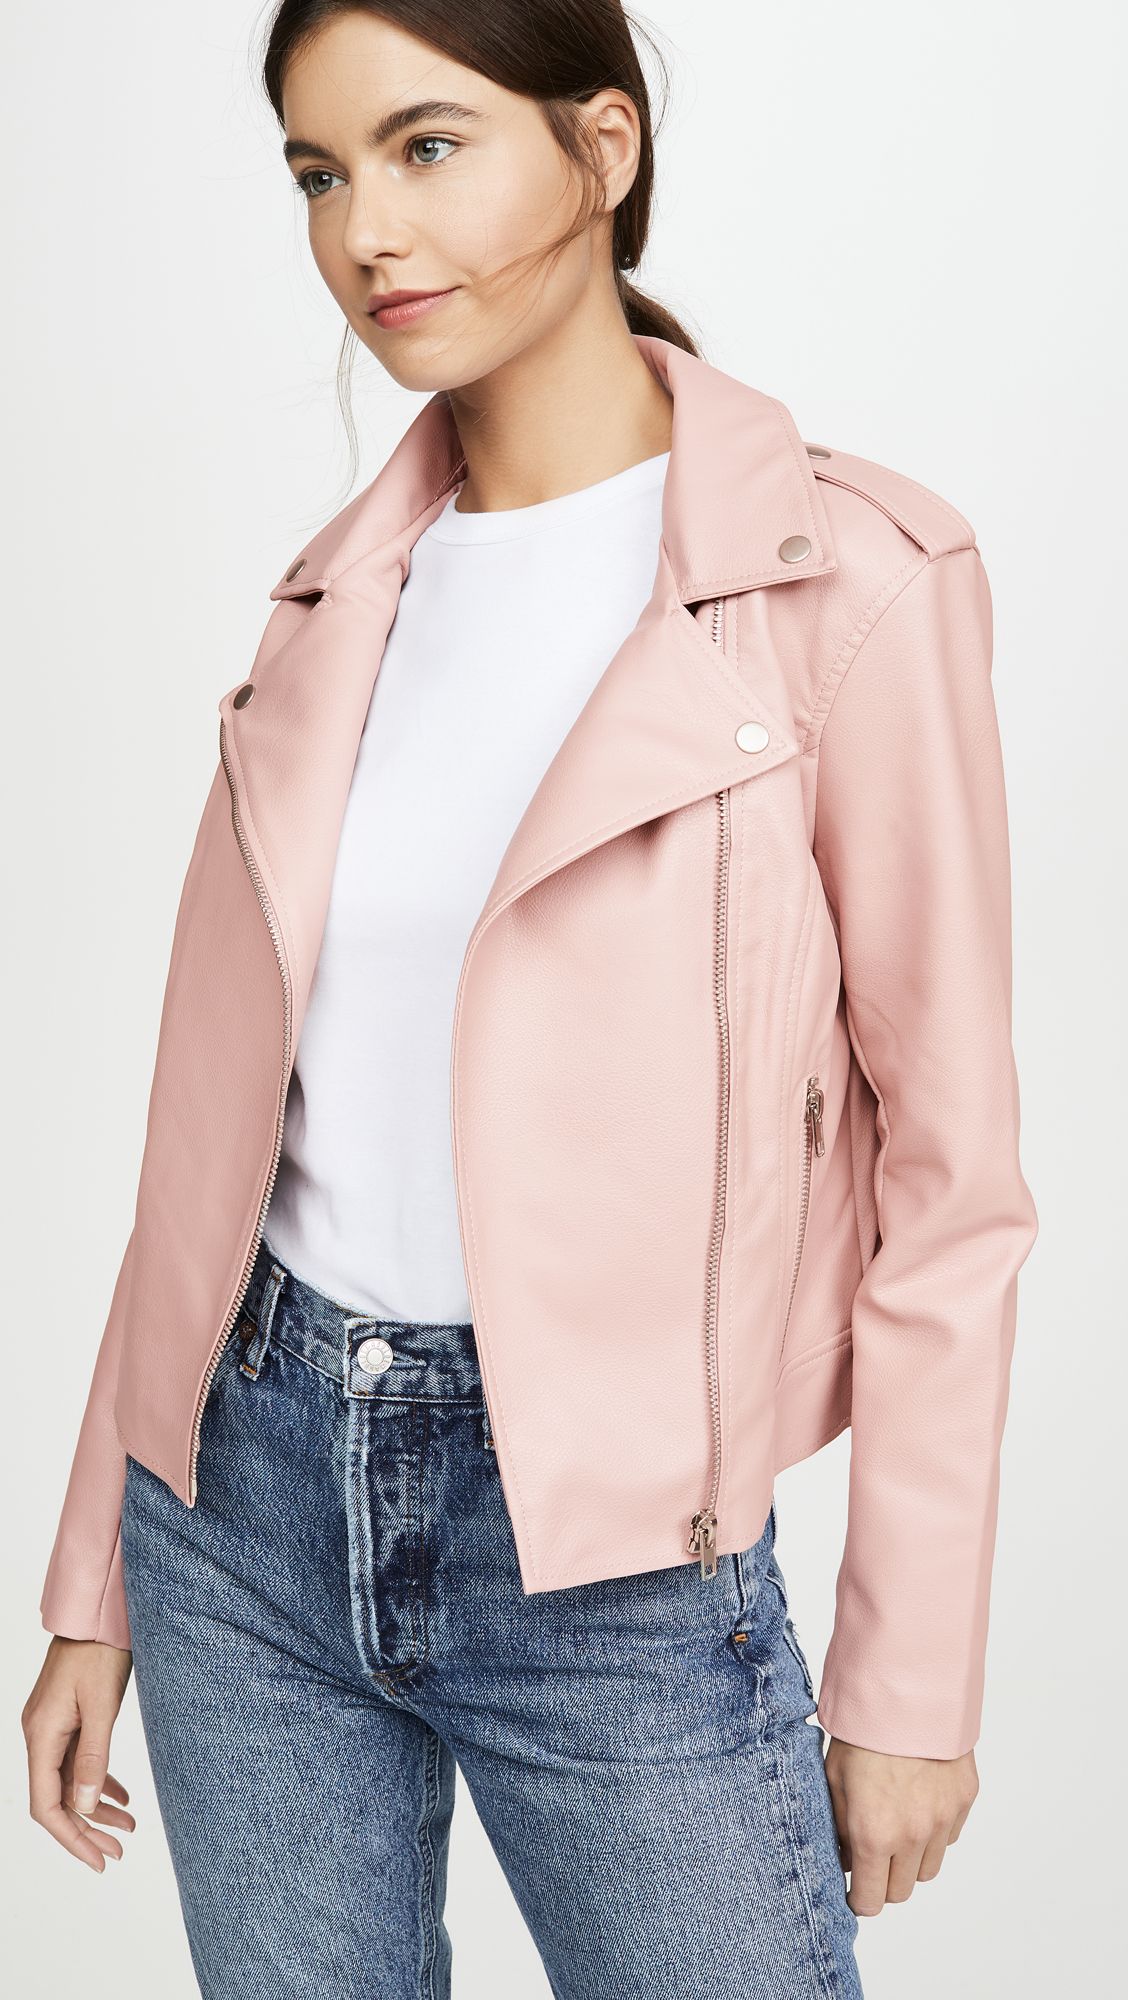 These 5 Spring Jacket Trends Are Dominating in 2020 | Who What Wear